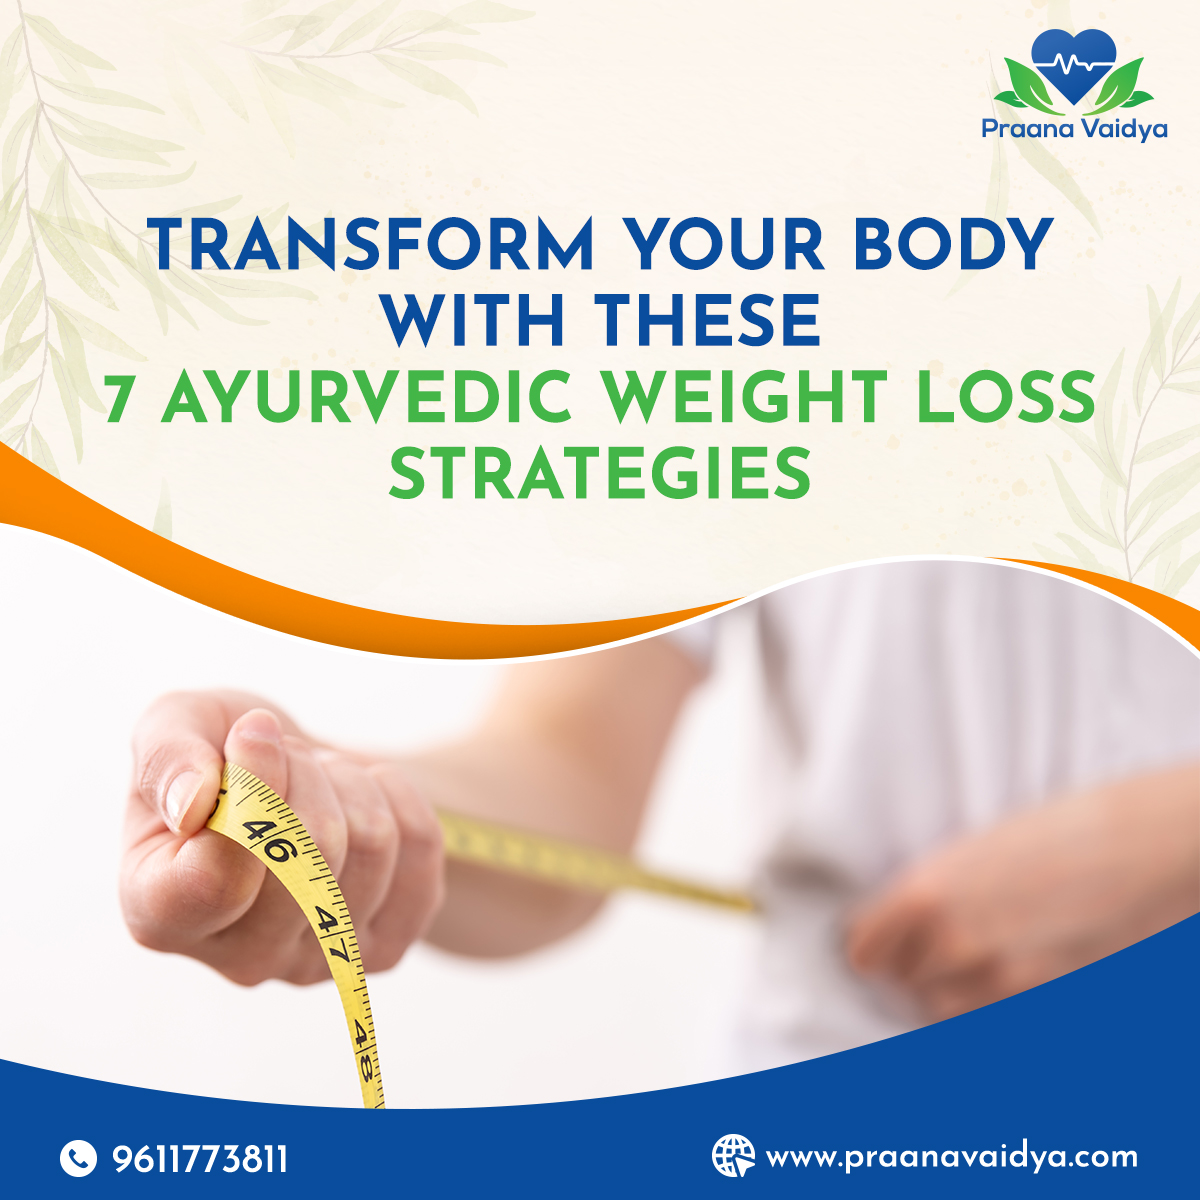 Transform Your Body With These 7 Ayurvedic Weight Loss Strategies